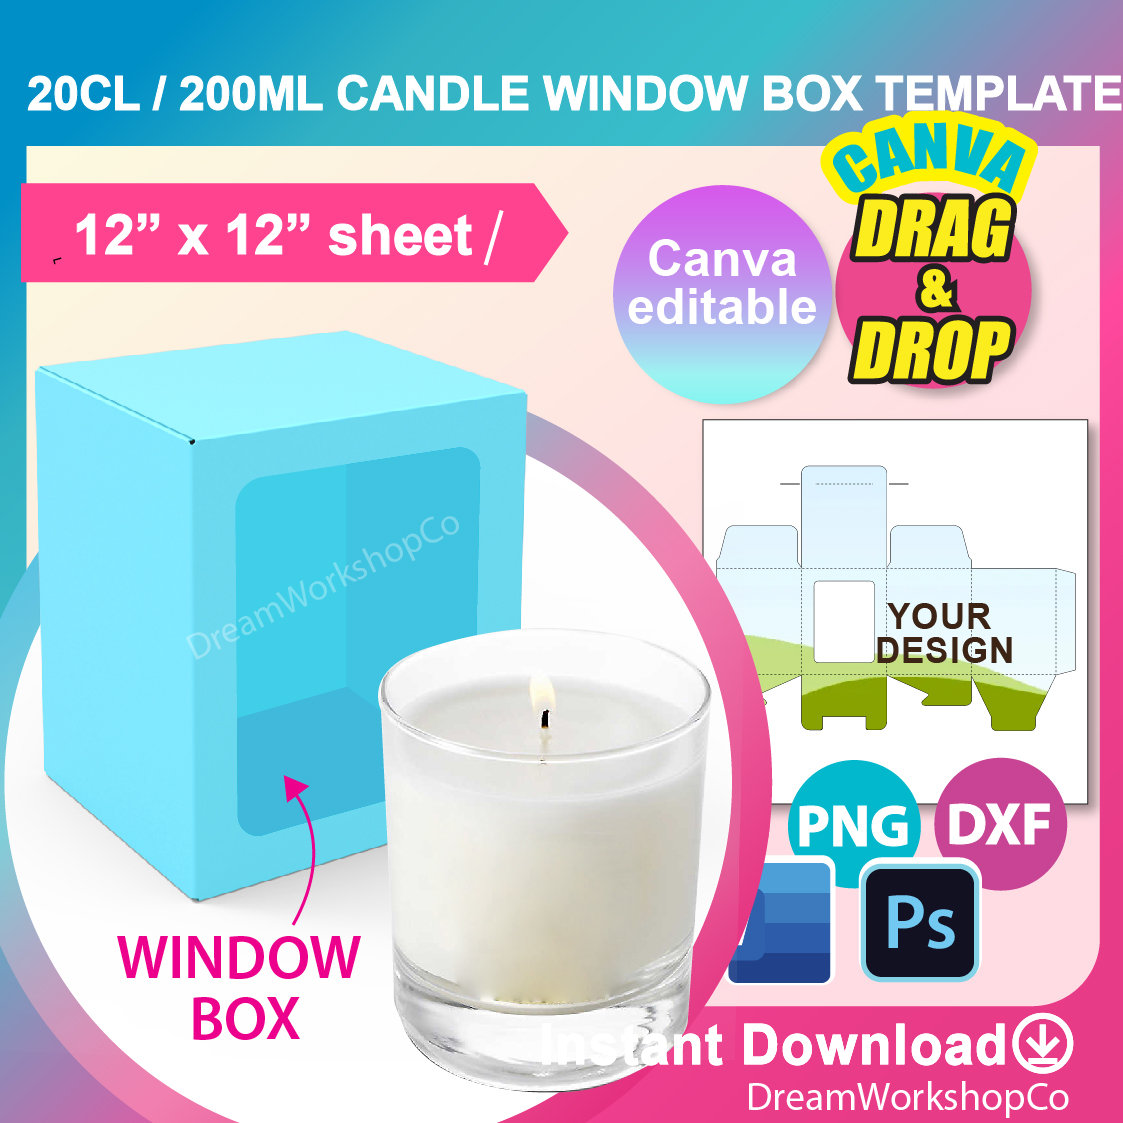 Candle Labels, Candle Jar Label Template, Canva Candle Labels